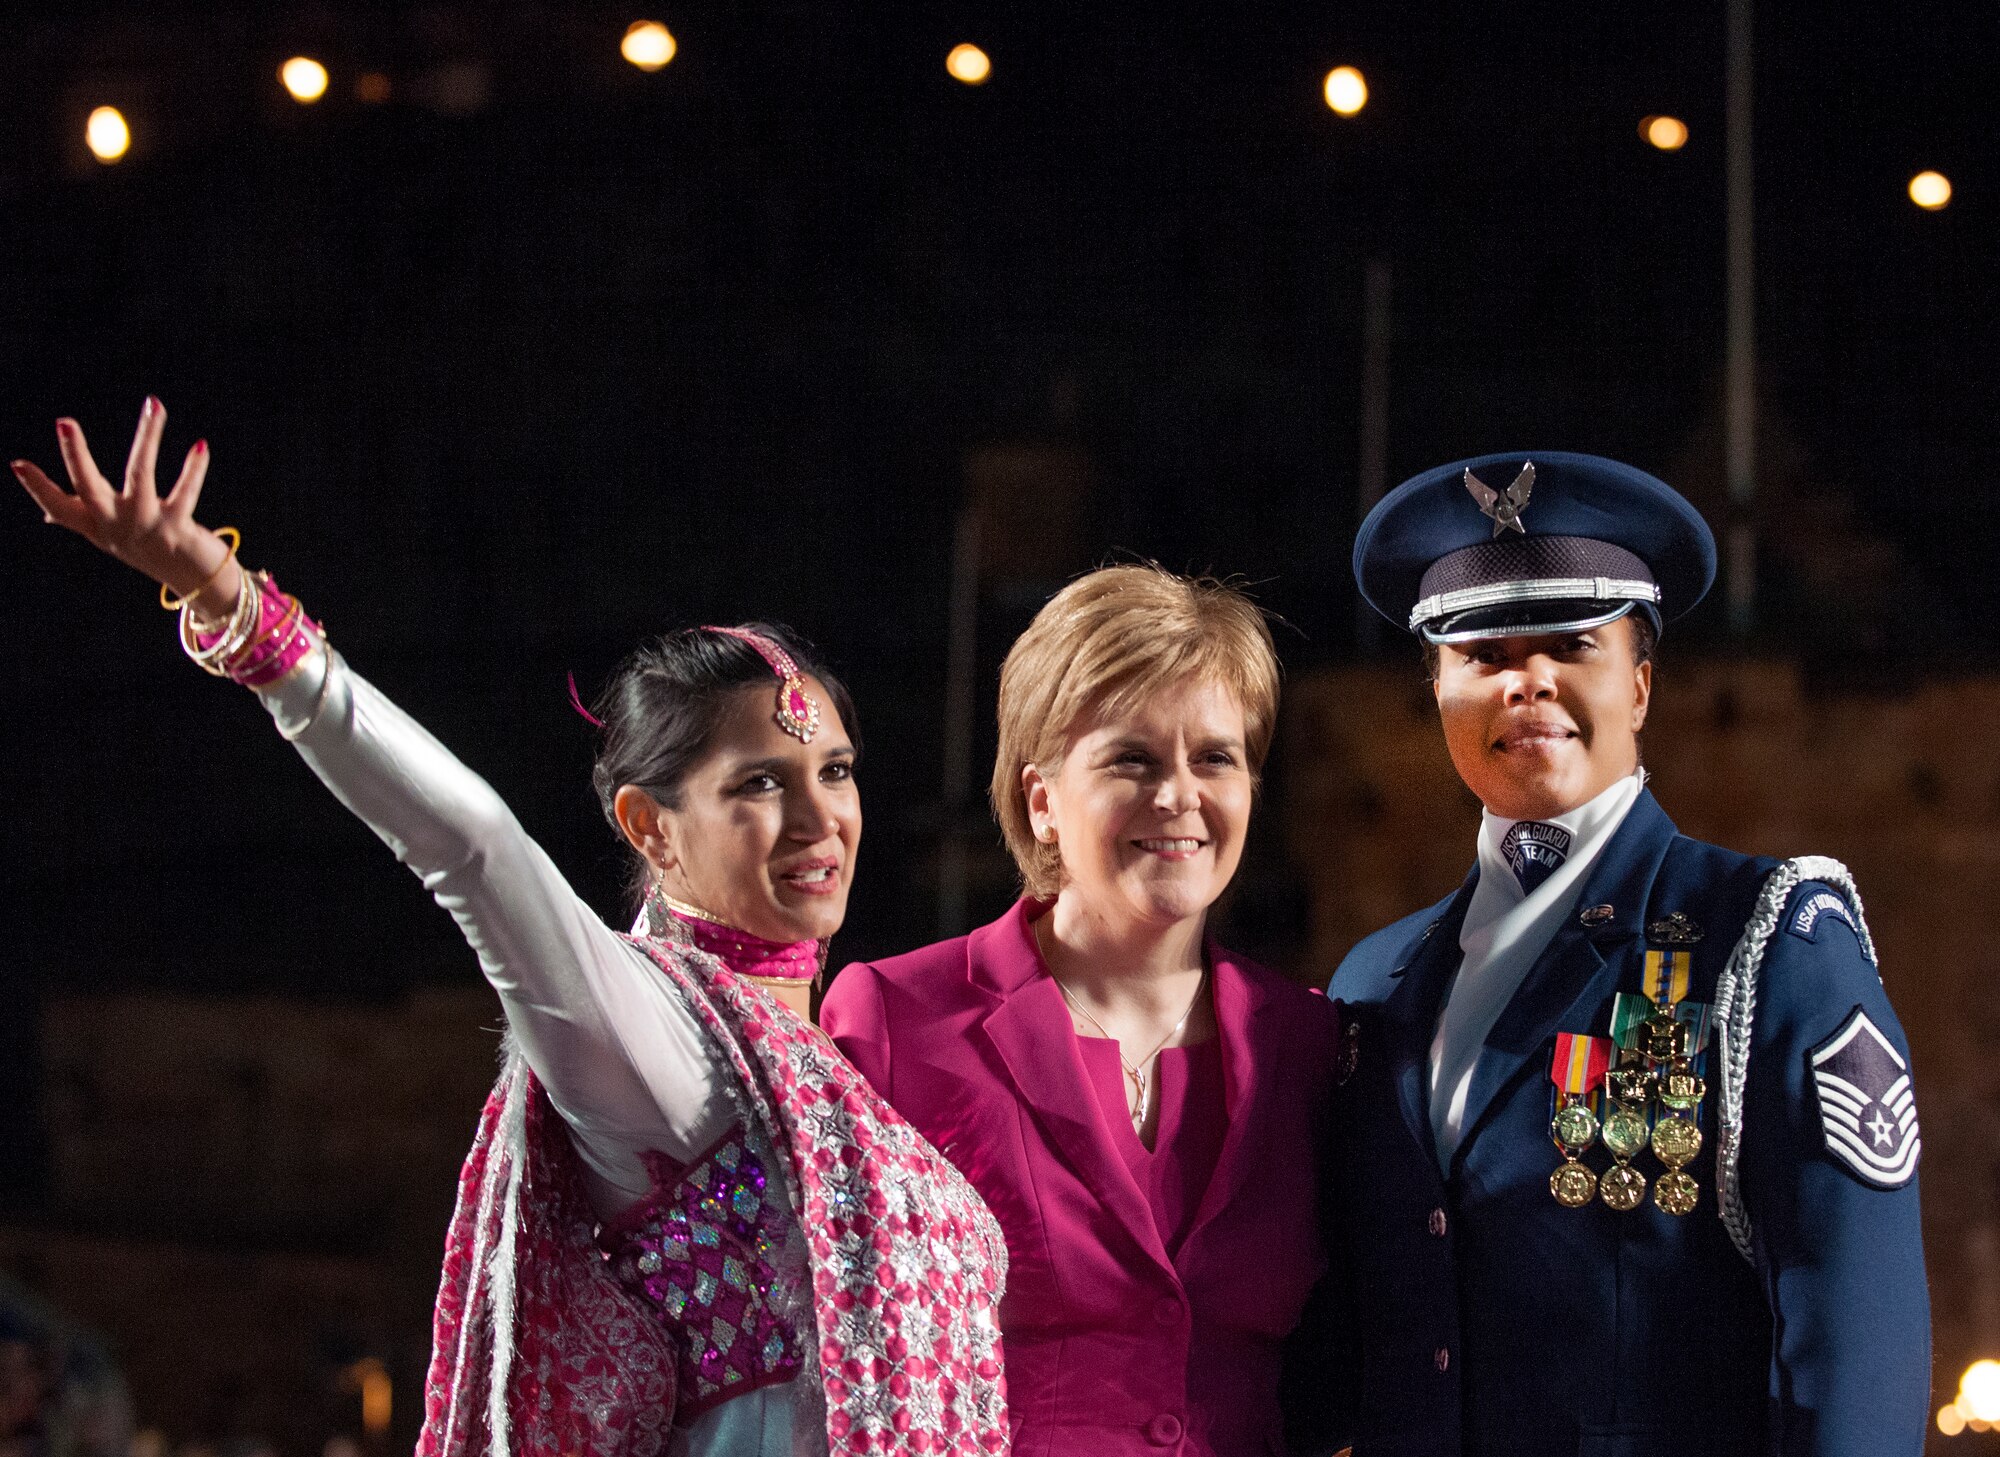 First Minister of Scotland, Nicola Sturgeon, meets with Bollywood dancer, Rea Krishnat Raye and United States Air Force Honor Guard Drill Team superintendent, Master Sgt. Tameka Woods during the Royal Edinburgh Military Tattoo Aug. 15, 2015 in Edinburgh, Scotland. Their meeting depicted this year's tattoo theme, "East Meets West: a celebration of the richness of international culture and the creative spirit of human endeavor." The tattoo brought together more than 1,390 performers from the U.S., Europe, Asia, Australia and Canada. (U.S. Air Force photo/Staff Sgt. Nichelle Anderson/released)